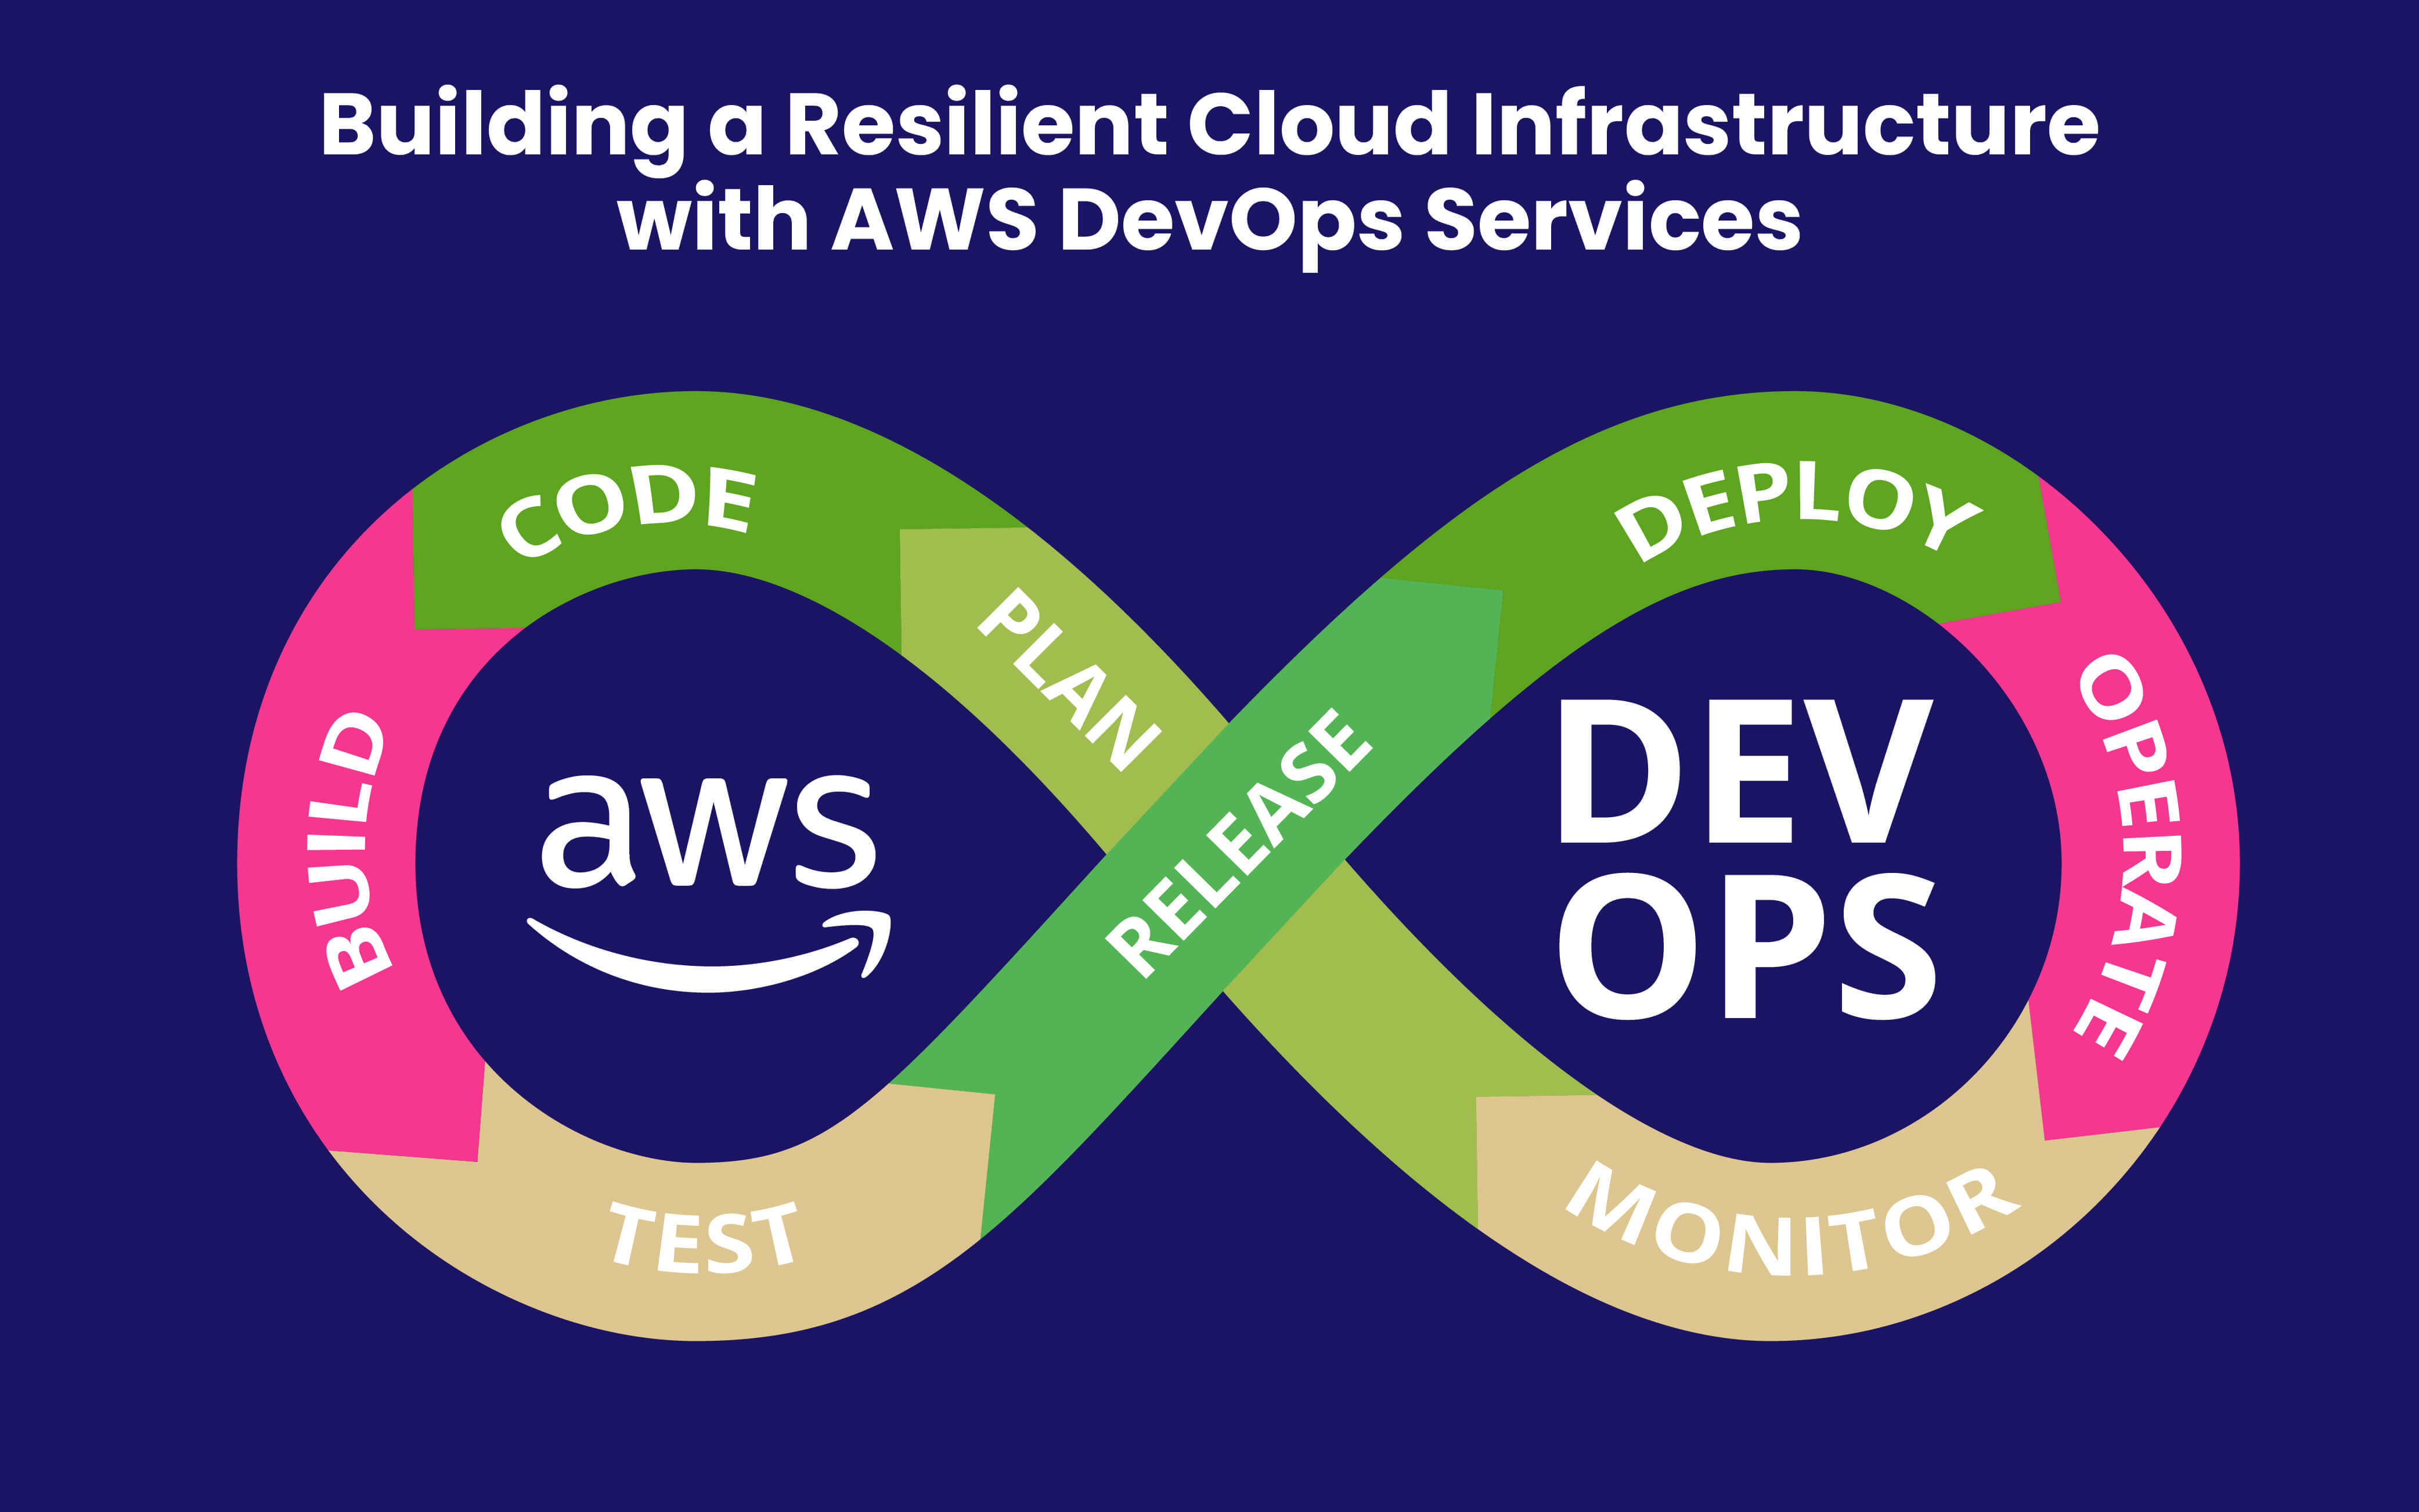 Building a Resilient Cloud Infrastructure with AWS DevOps Services